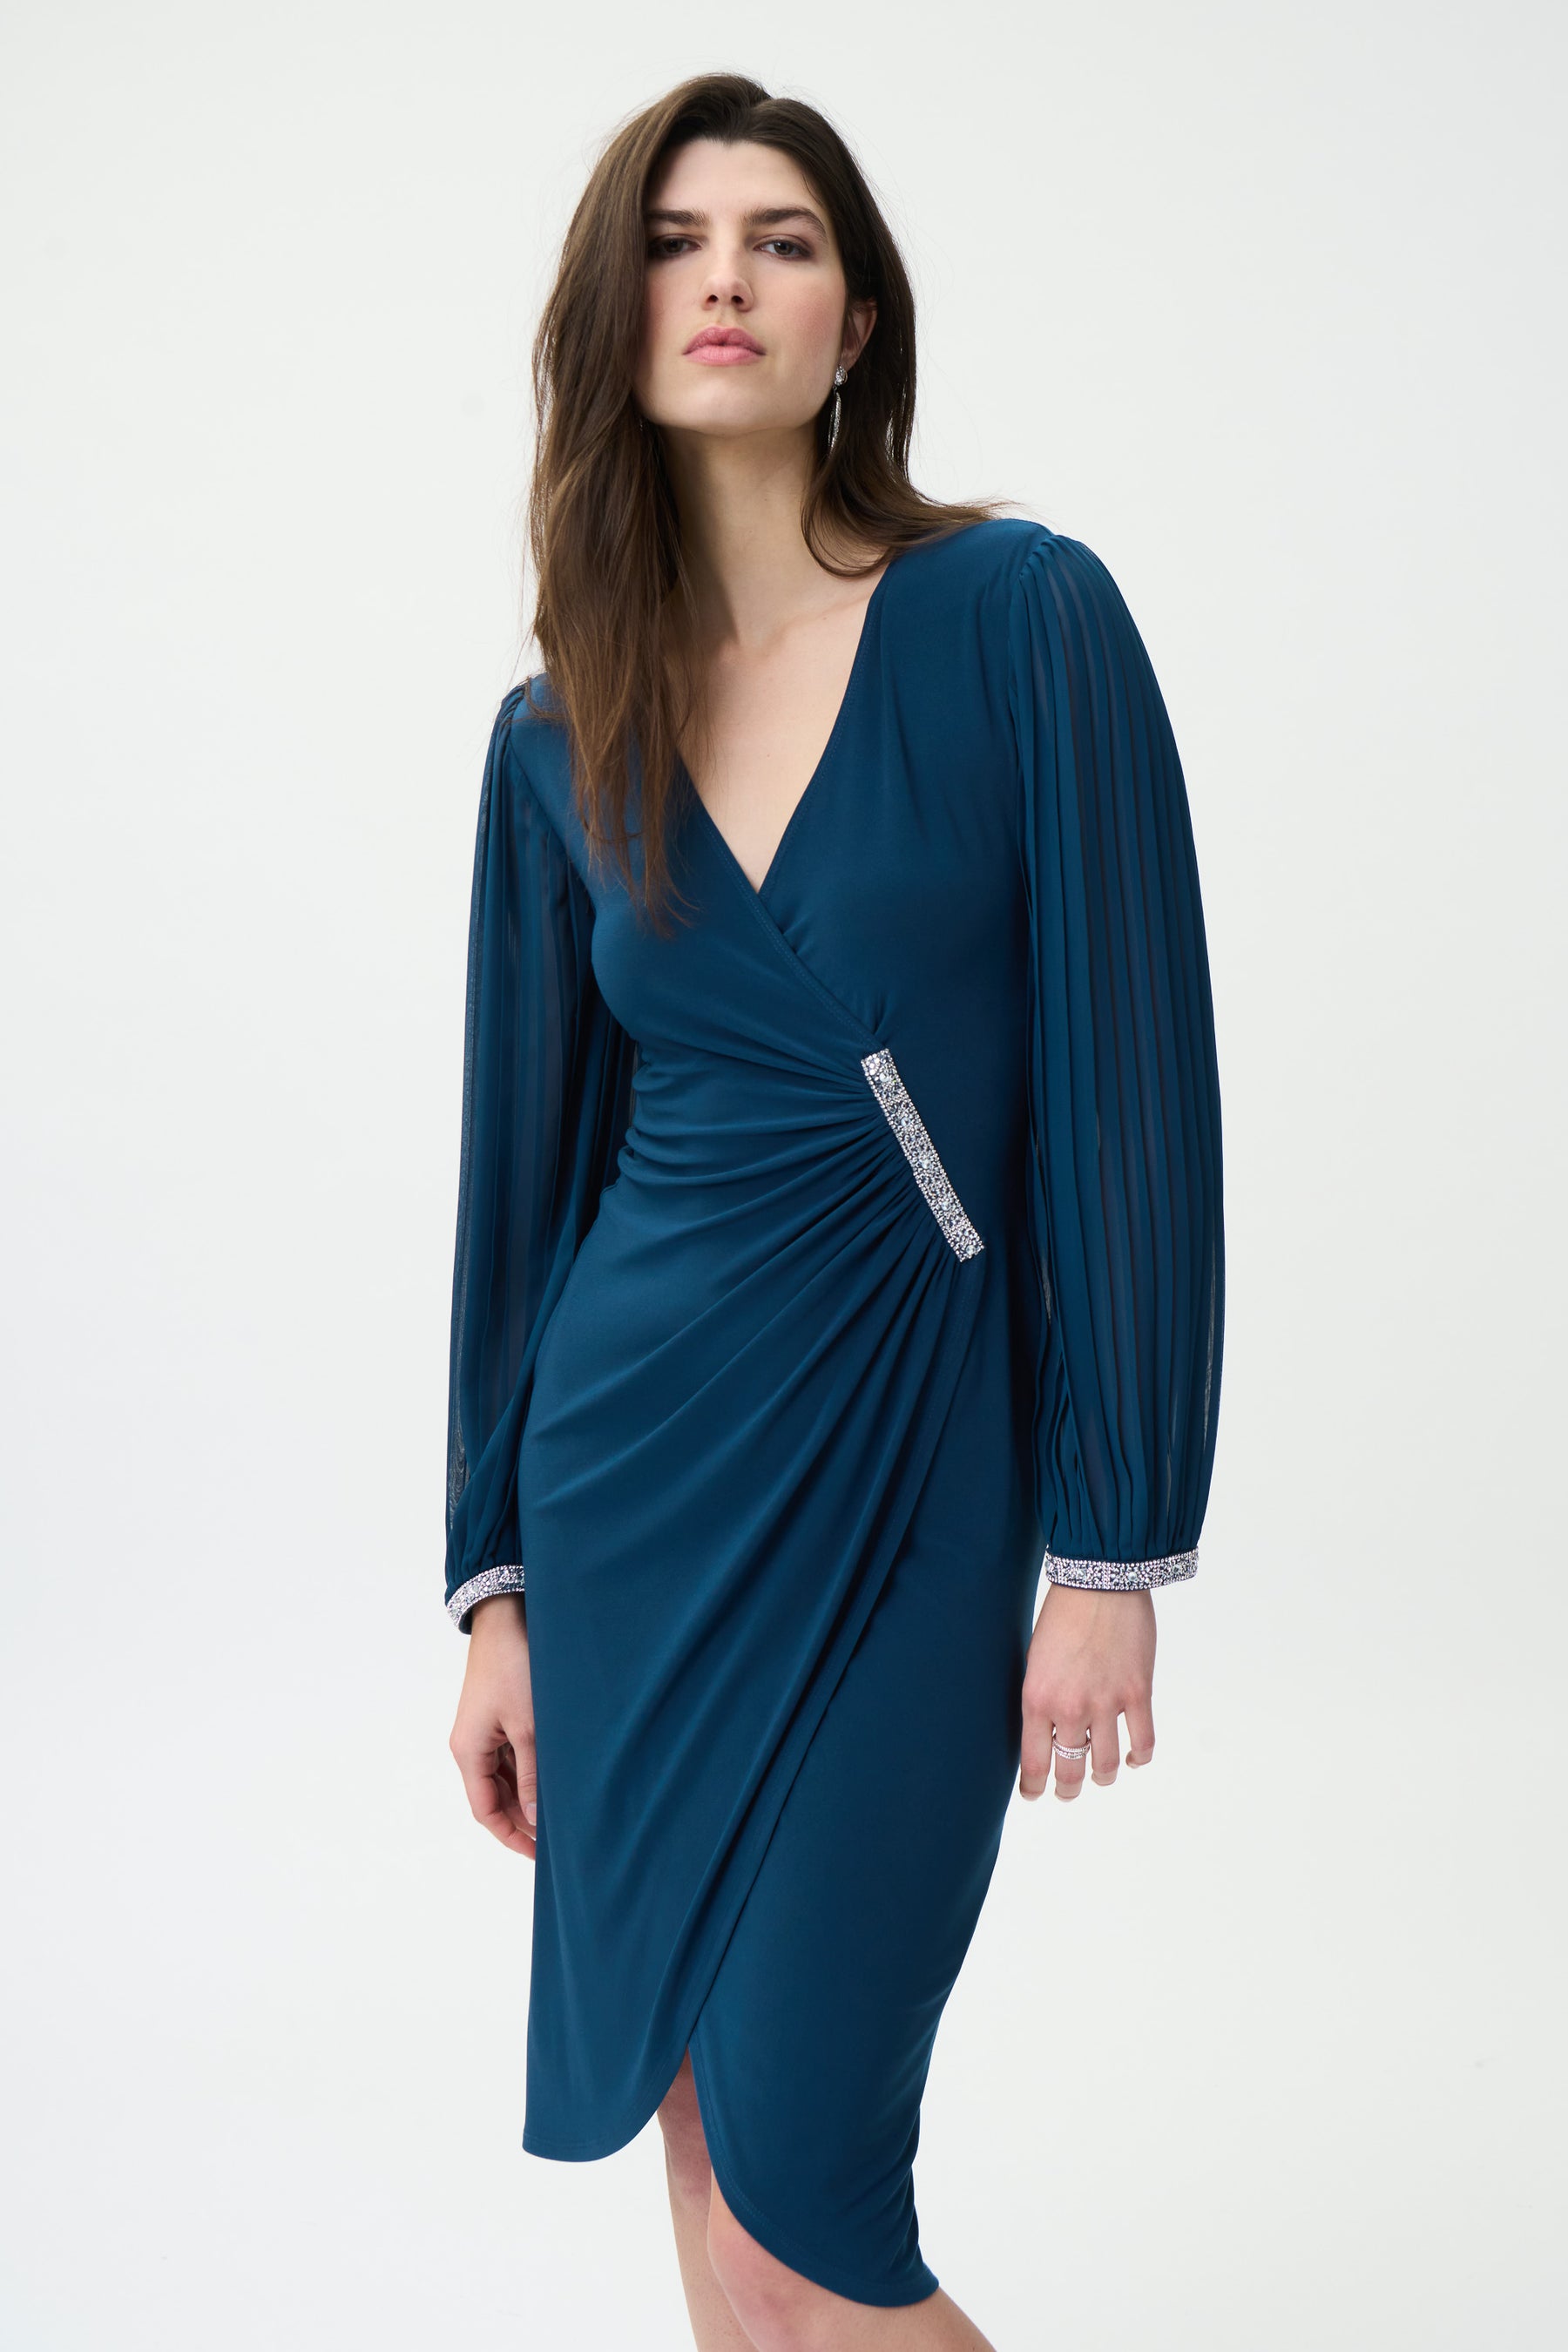 Shimmery Detail Side Ruched Dress